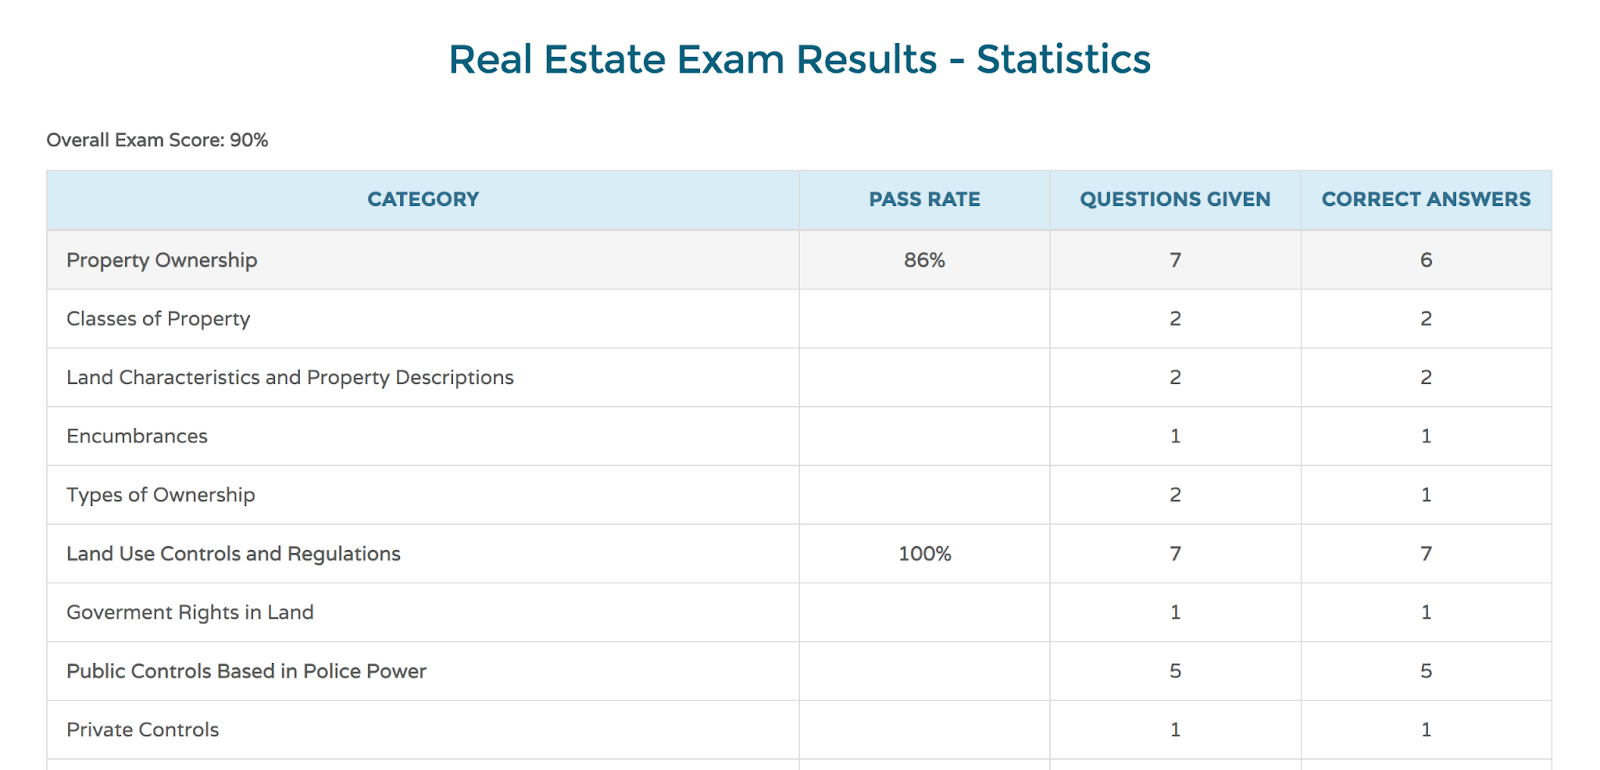 Table with exam results showing category, pass rate, questions, and correct answers.